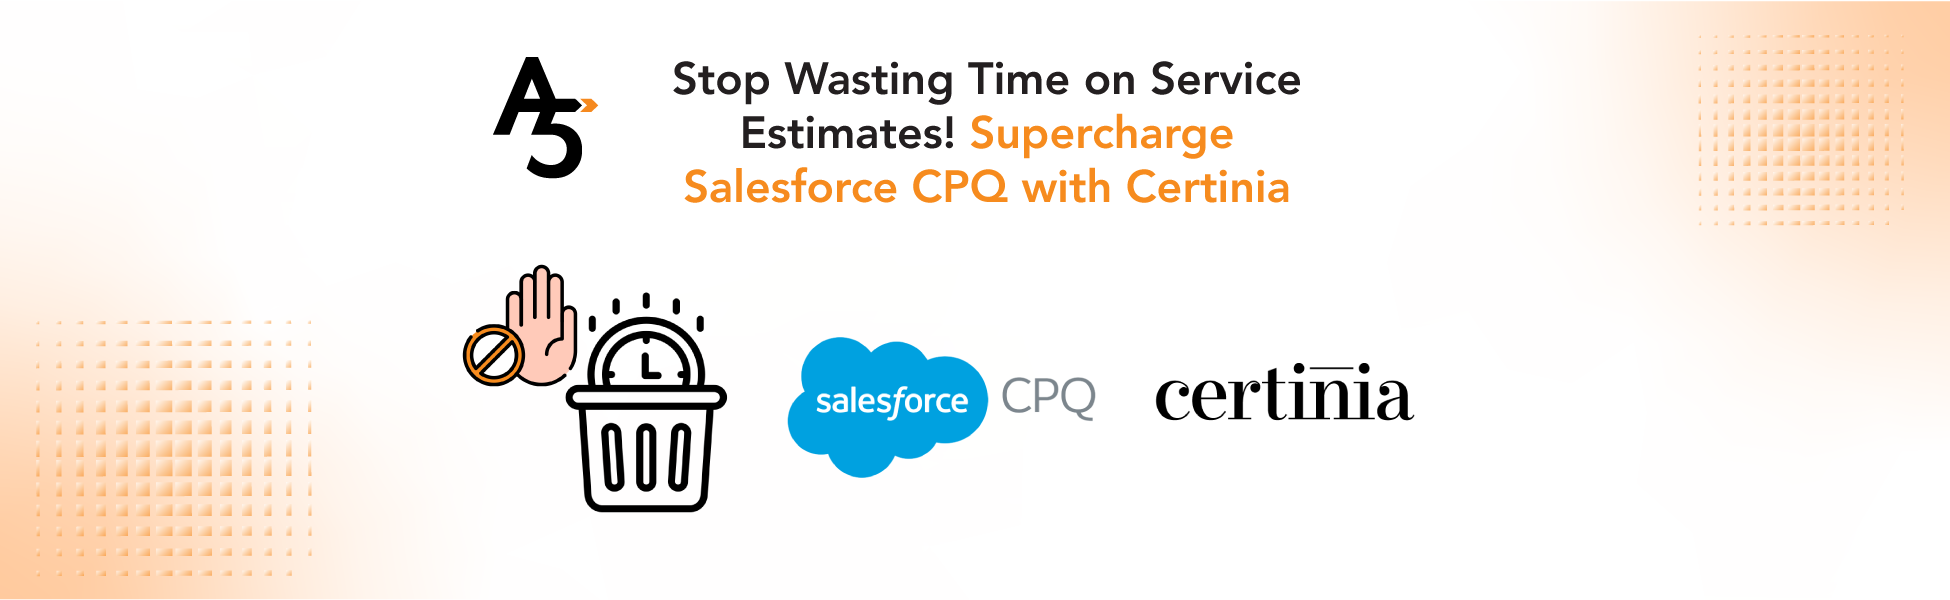 Service Estimates Made Easy with Certinia on Salesforce CPQ